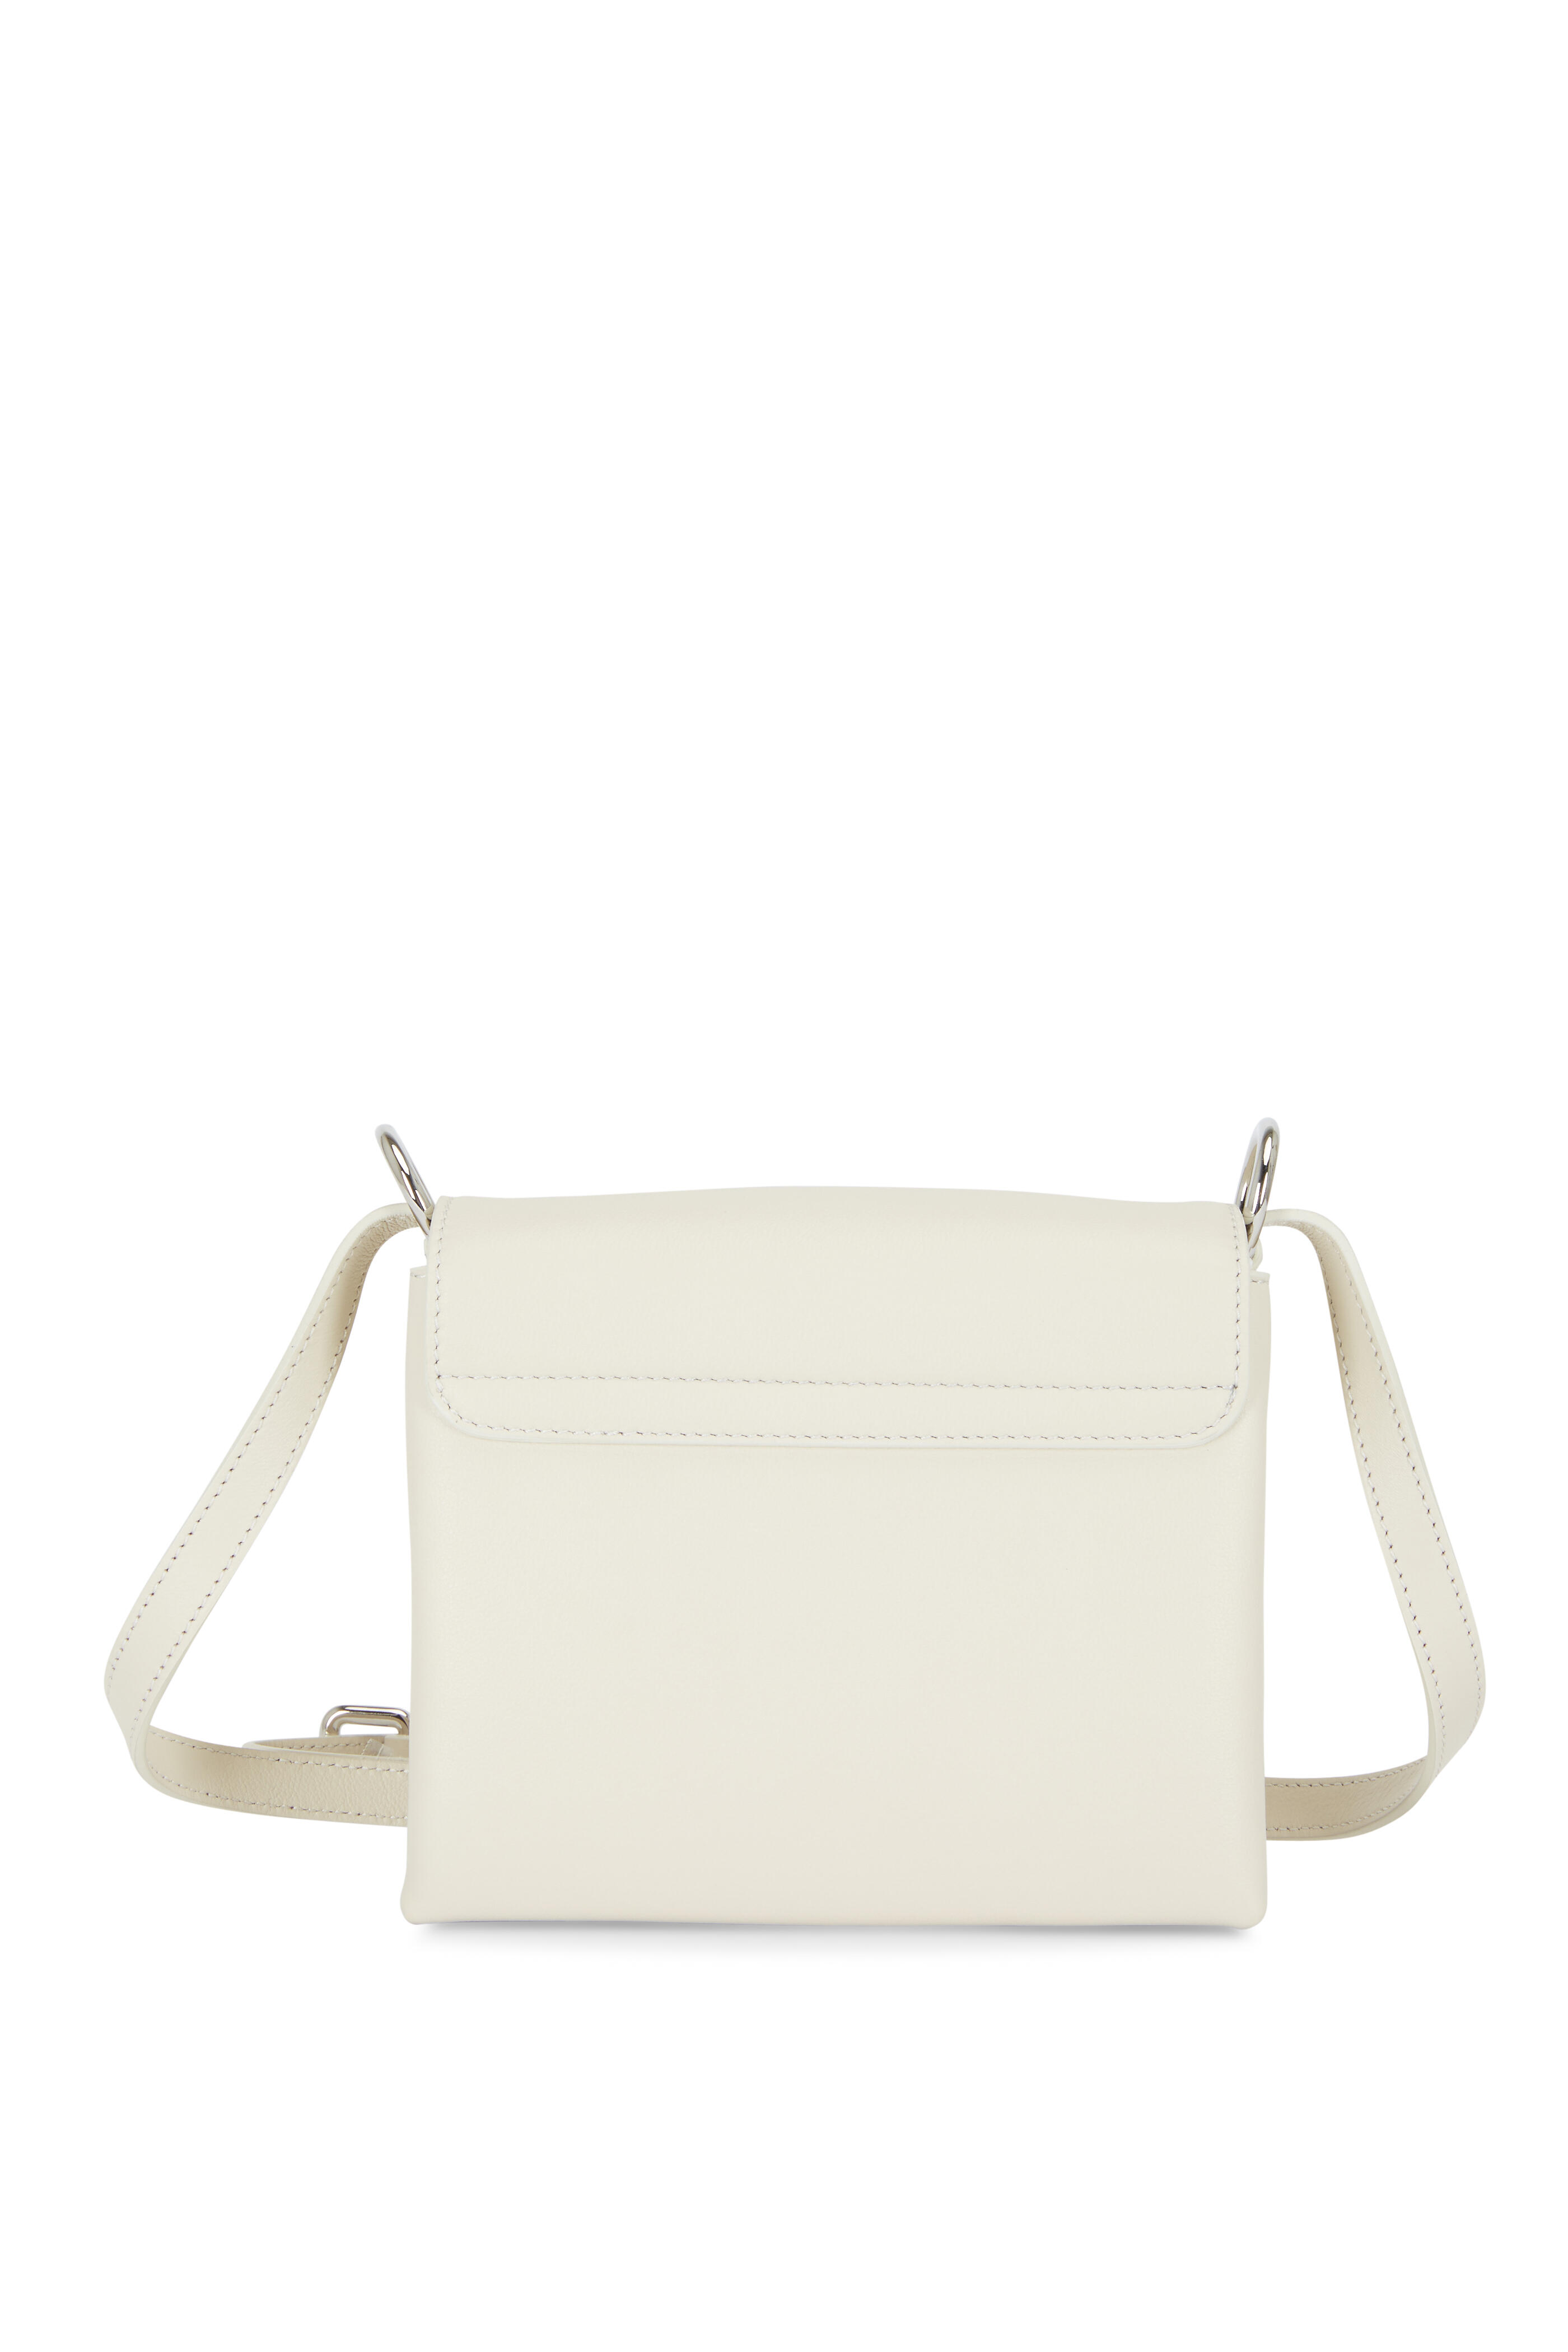 Off-White Bags for Women, Cross-body bags